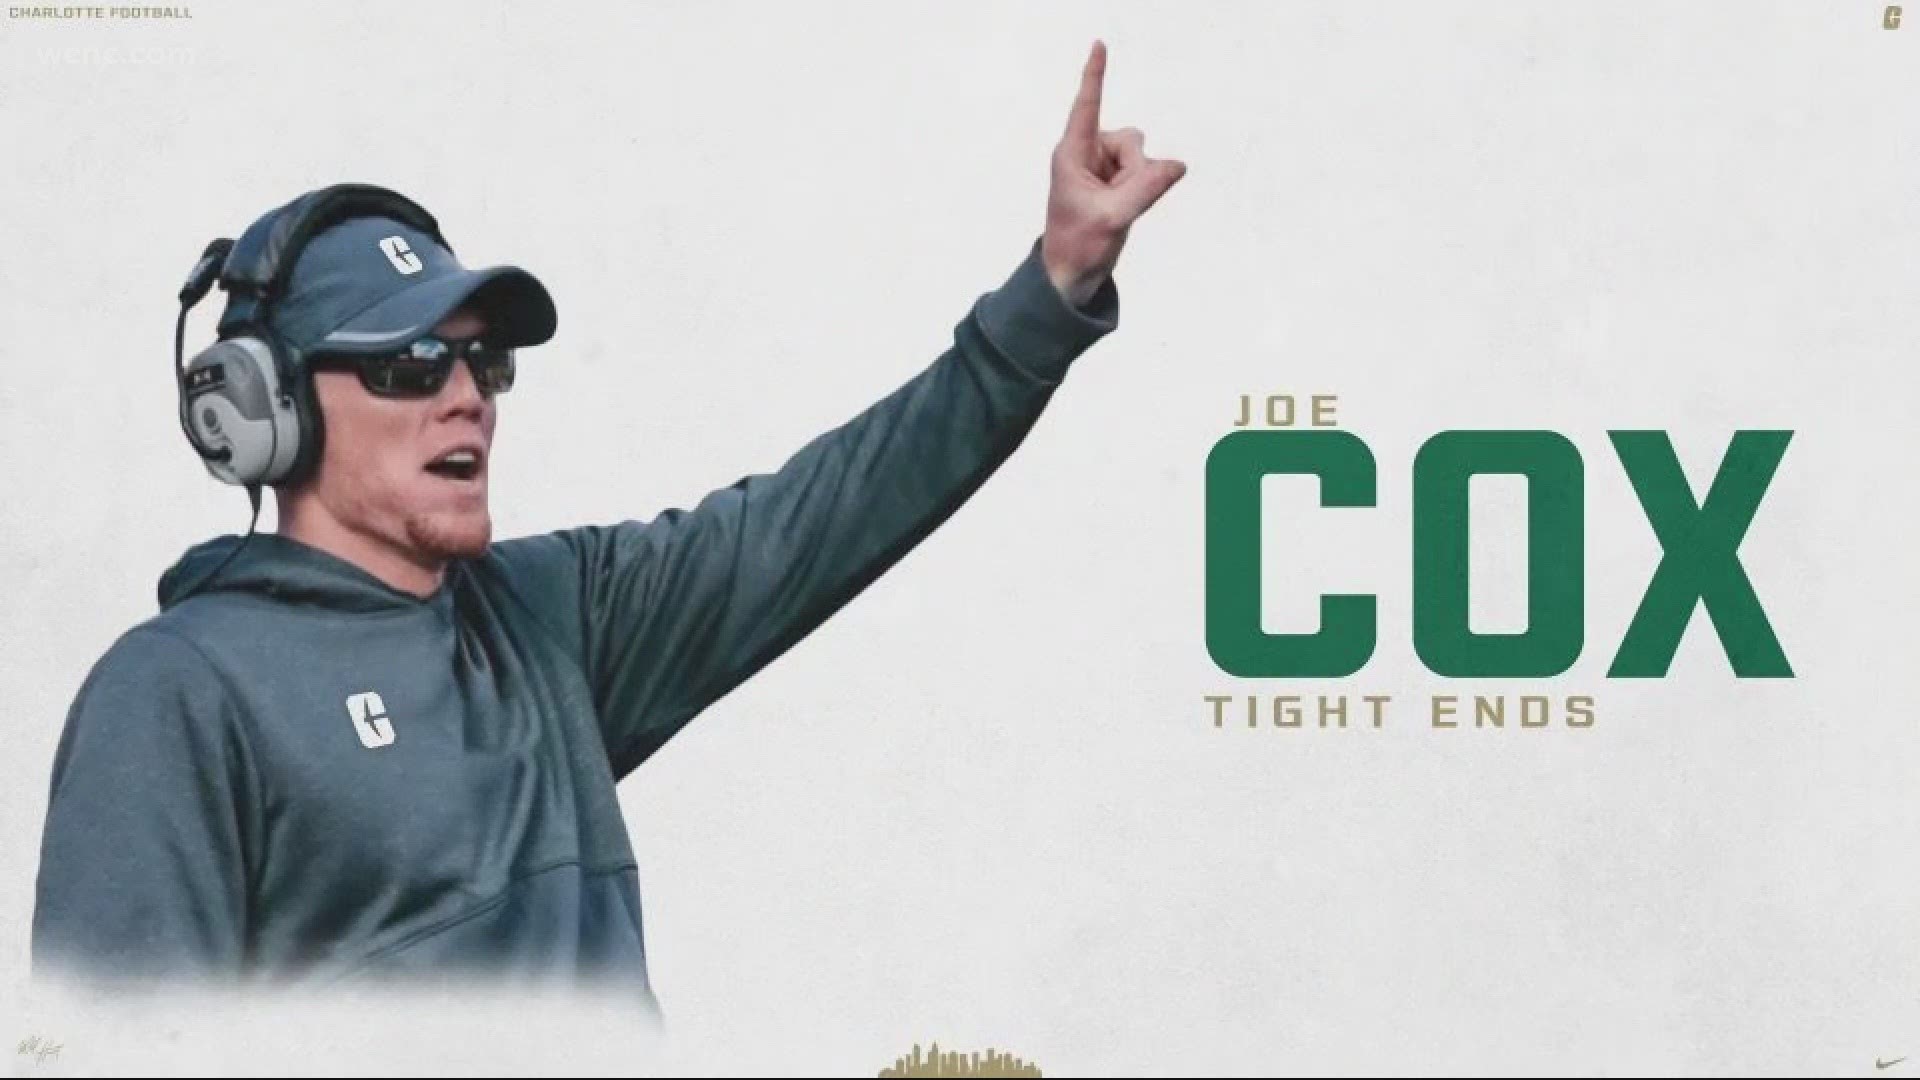 The team has announced the hire of Joe Cox.